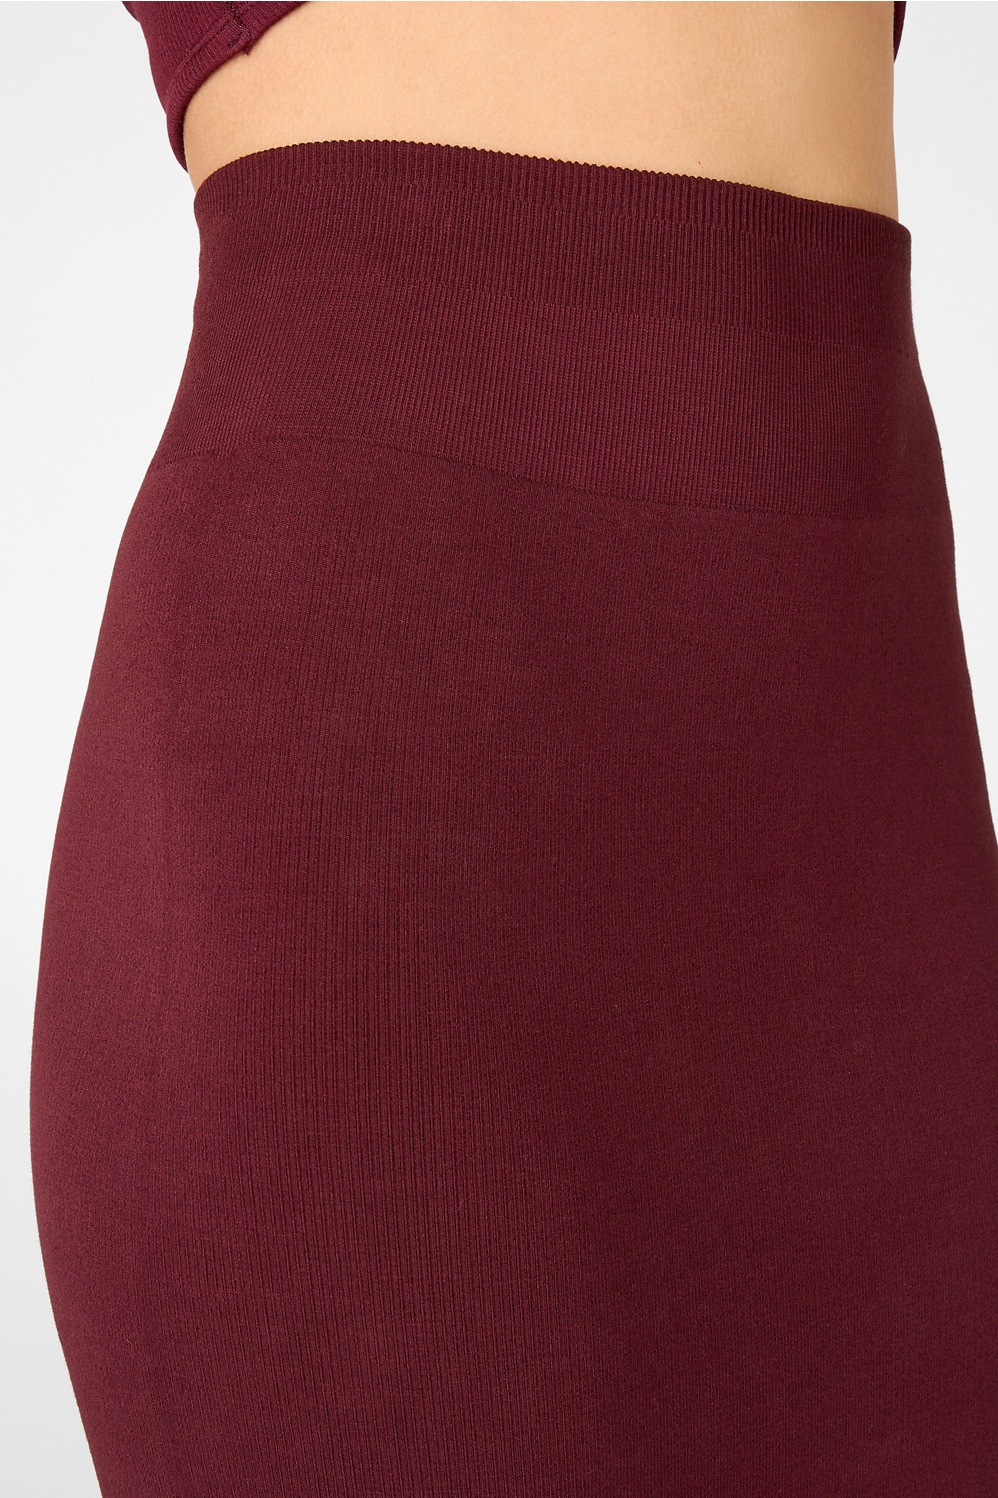 Fabletics Kinsley High-Waisted Ribbed Seamless Skirt Port Wine Size 10 RRP £ 44